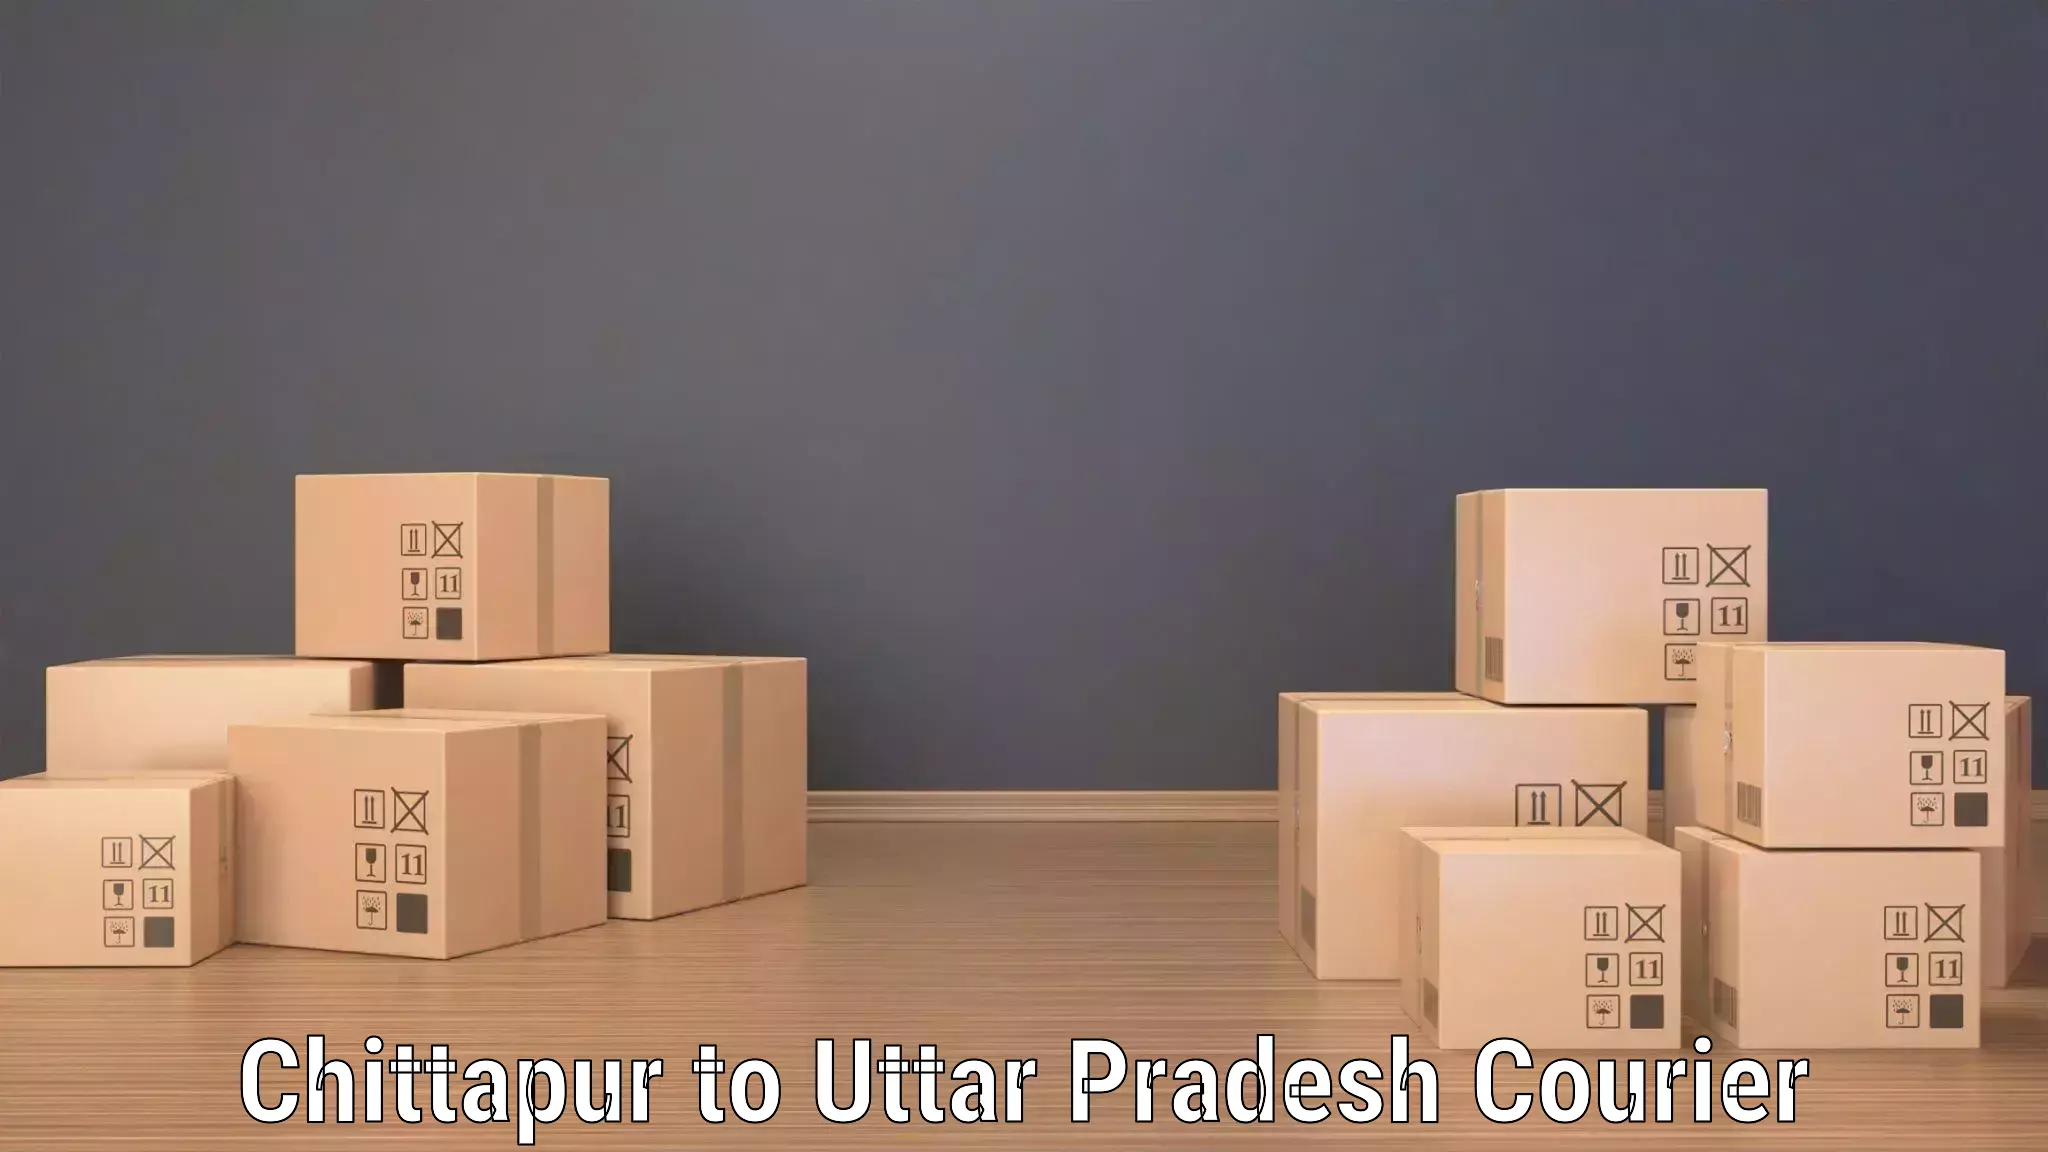 Same-day delivery solutions Chittapur to Salemgarh